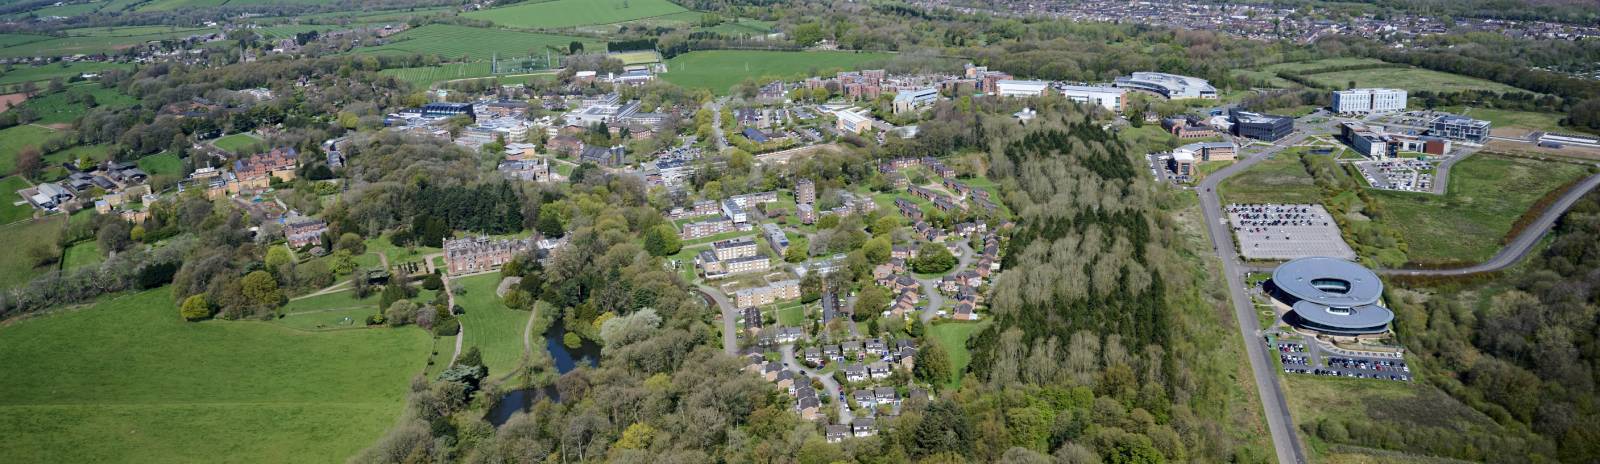 An aerial photo of Keele's Campus